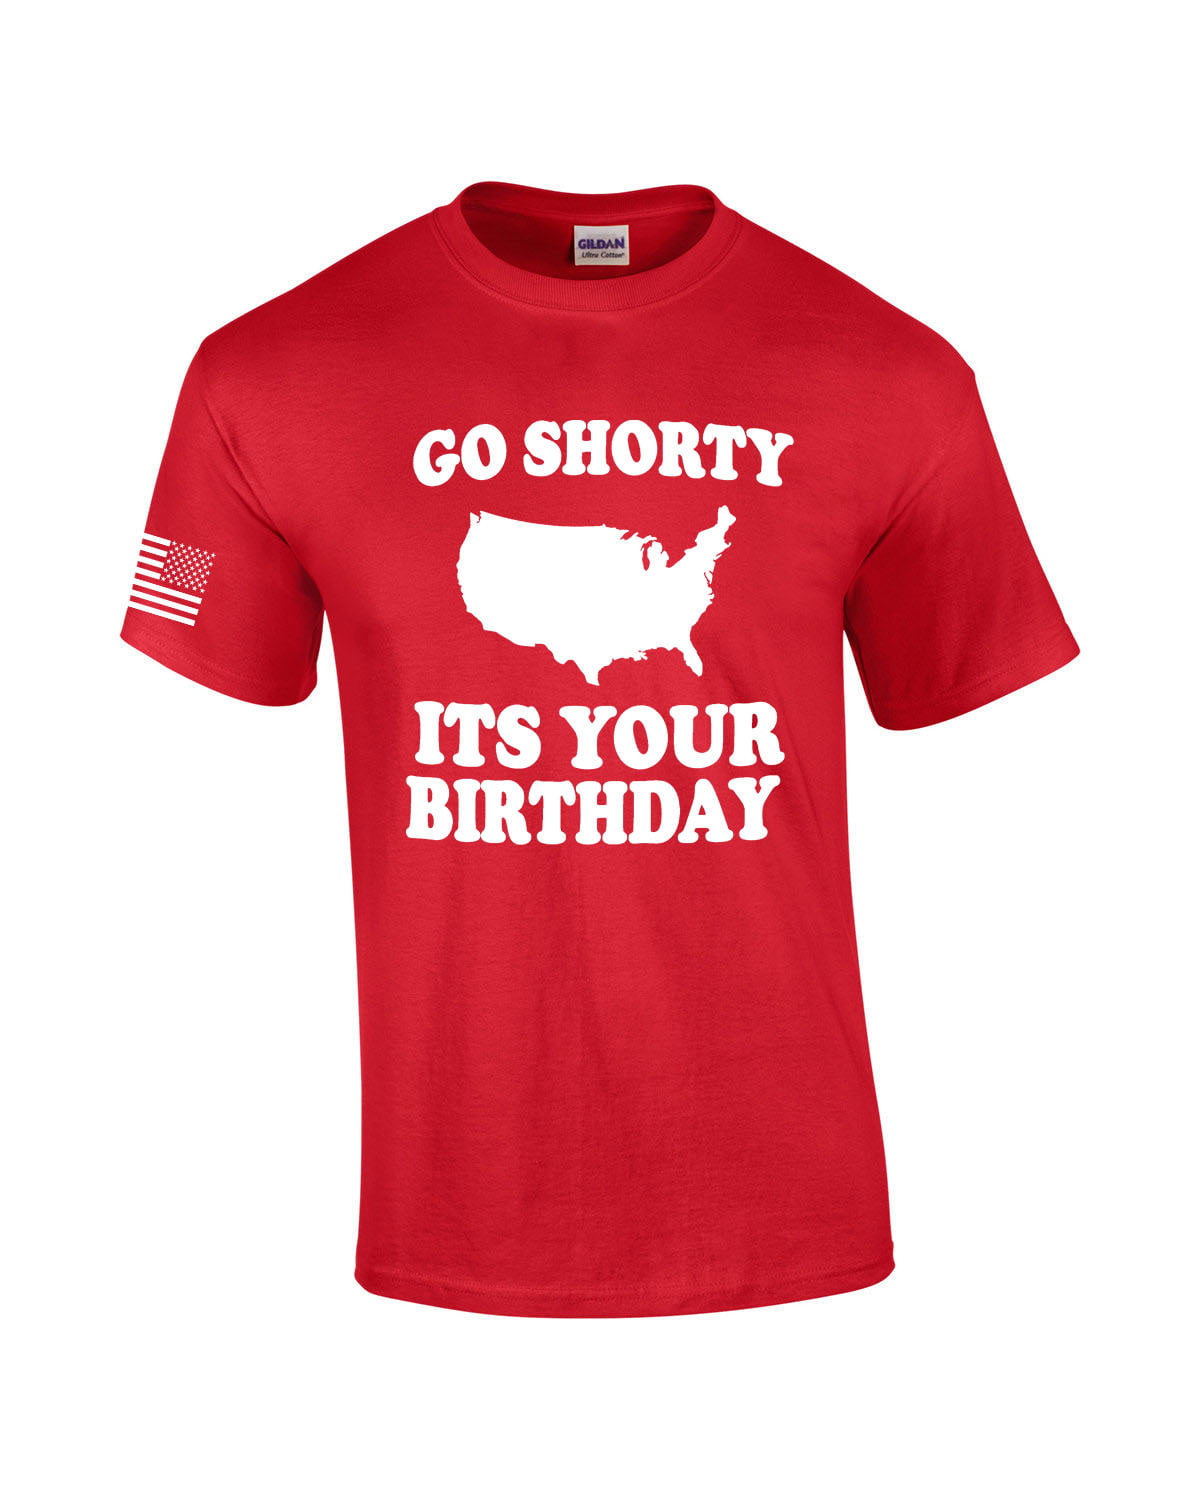 Go Shawty It's Your Birthday Essential T-Shirt for Sale by